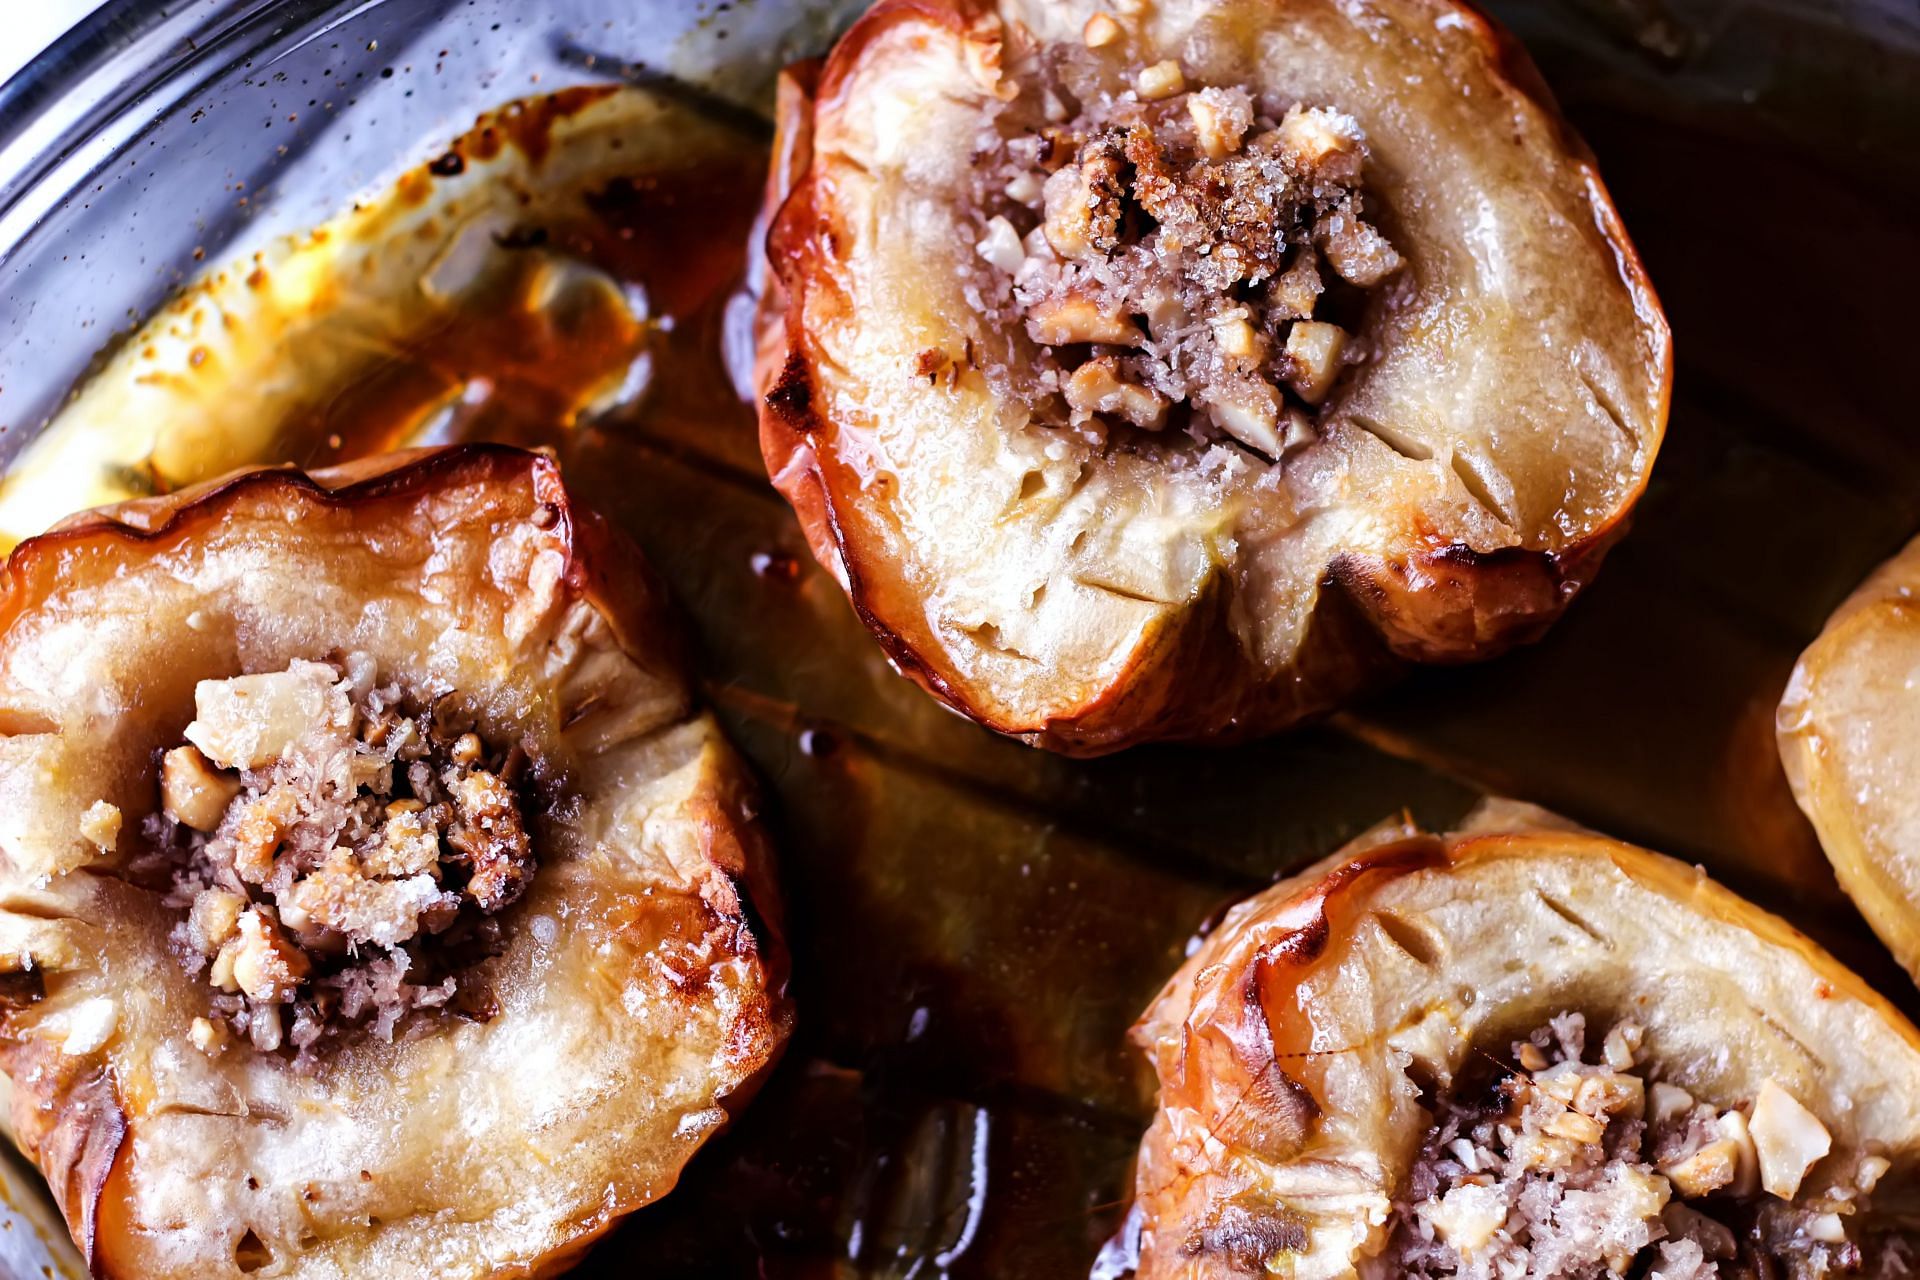 Baked apple desserts are quite yummy and healthy. (Image via Unsplash/Liia Plmp)